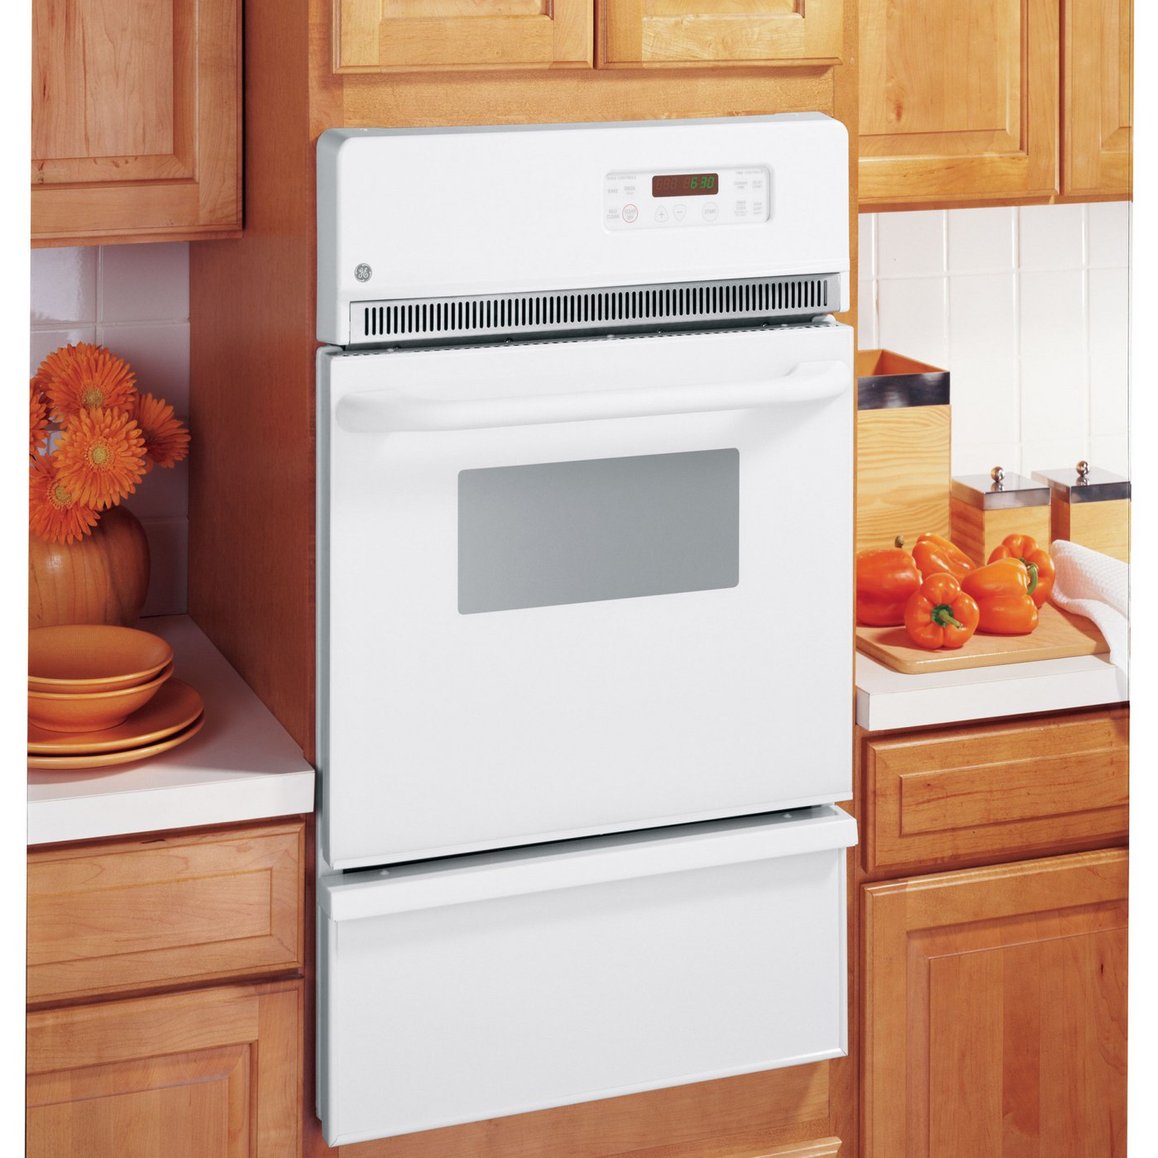 Best Gas Wall Ovens (Reviews / Ratings / Prices)